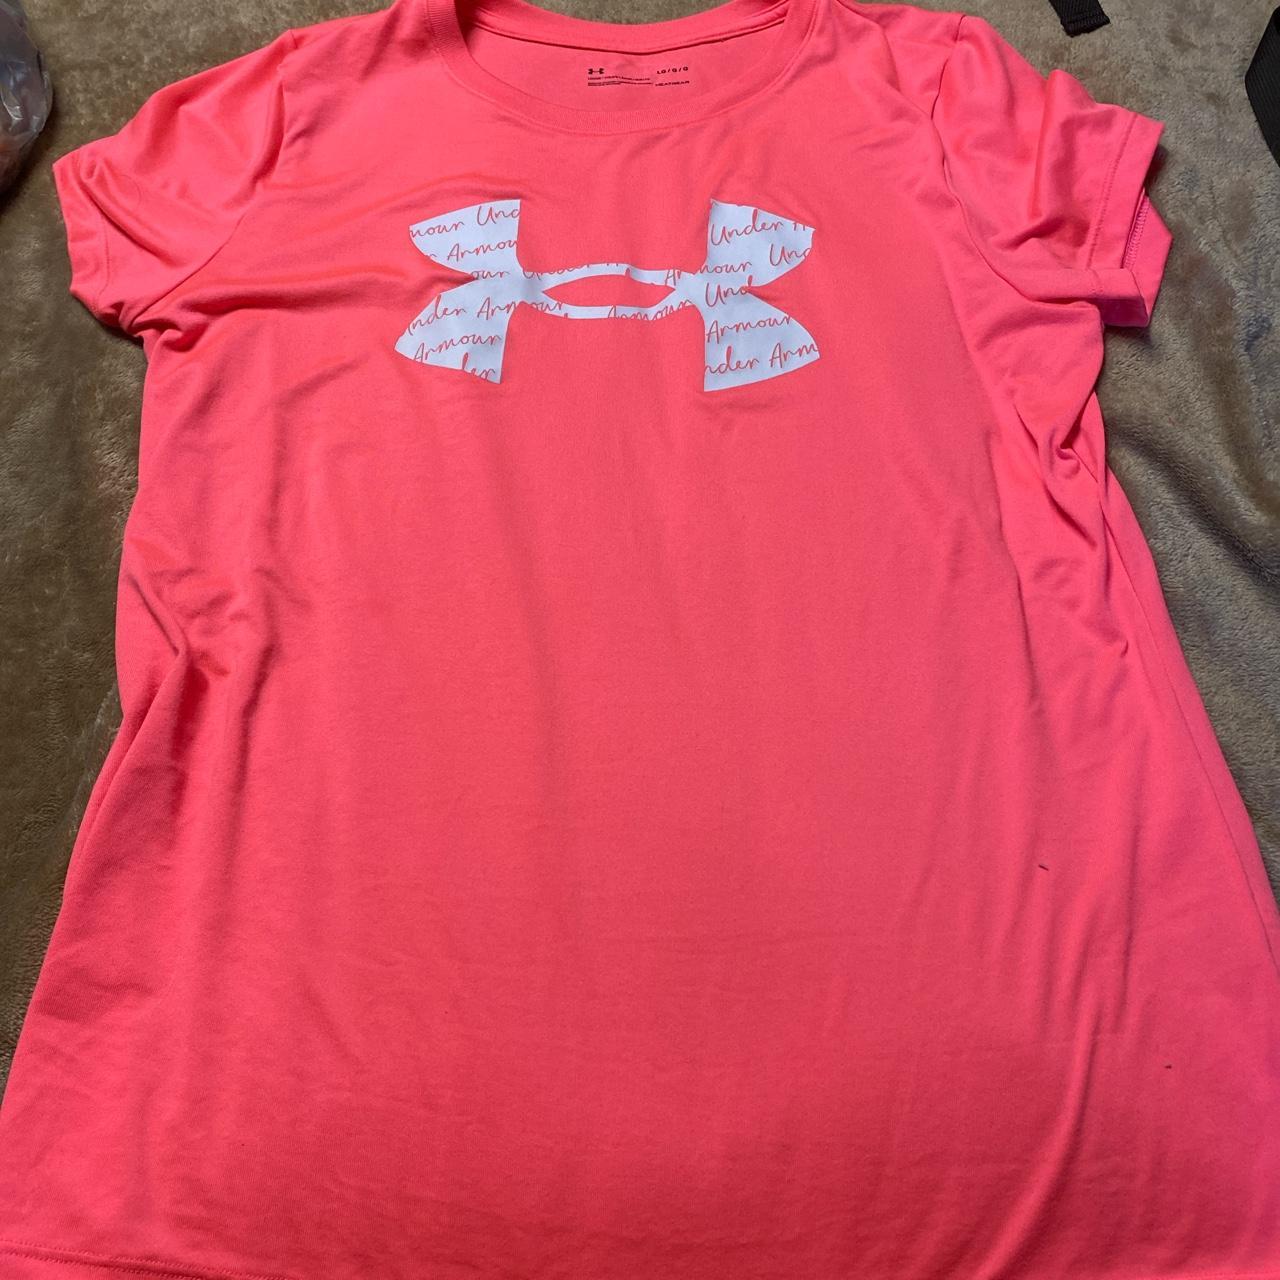 ~Hot pink athletic shirt- Under Armor, ~Size large